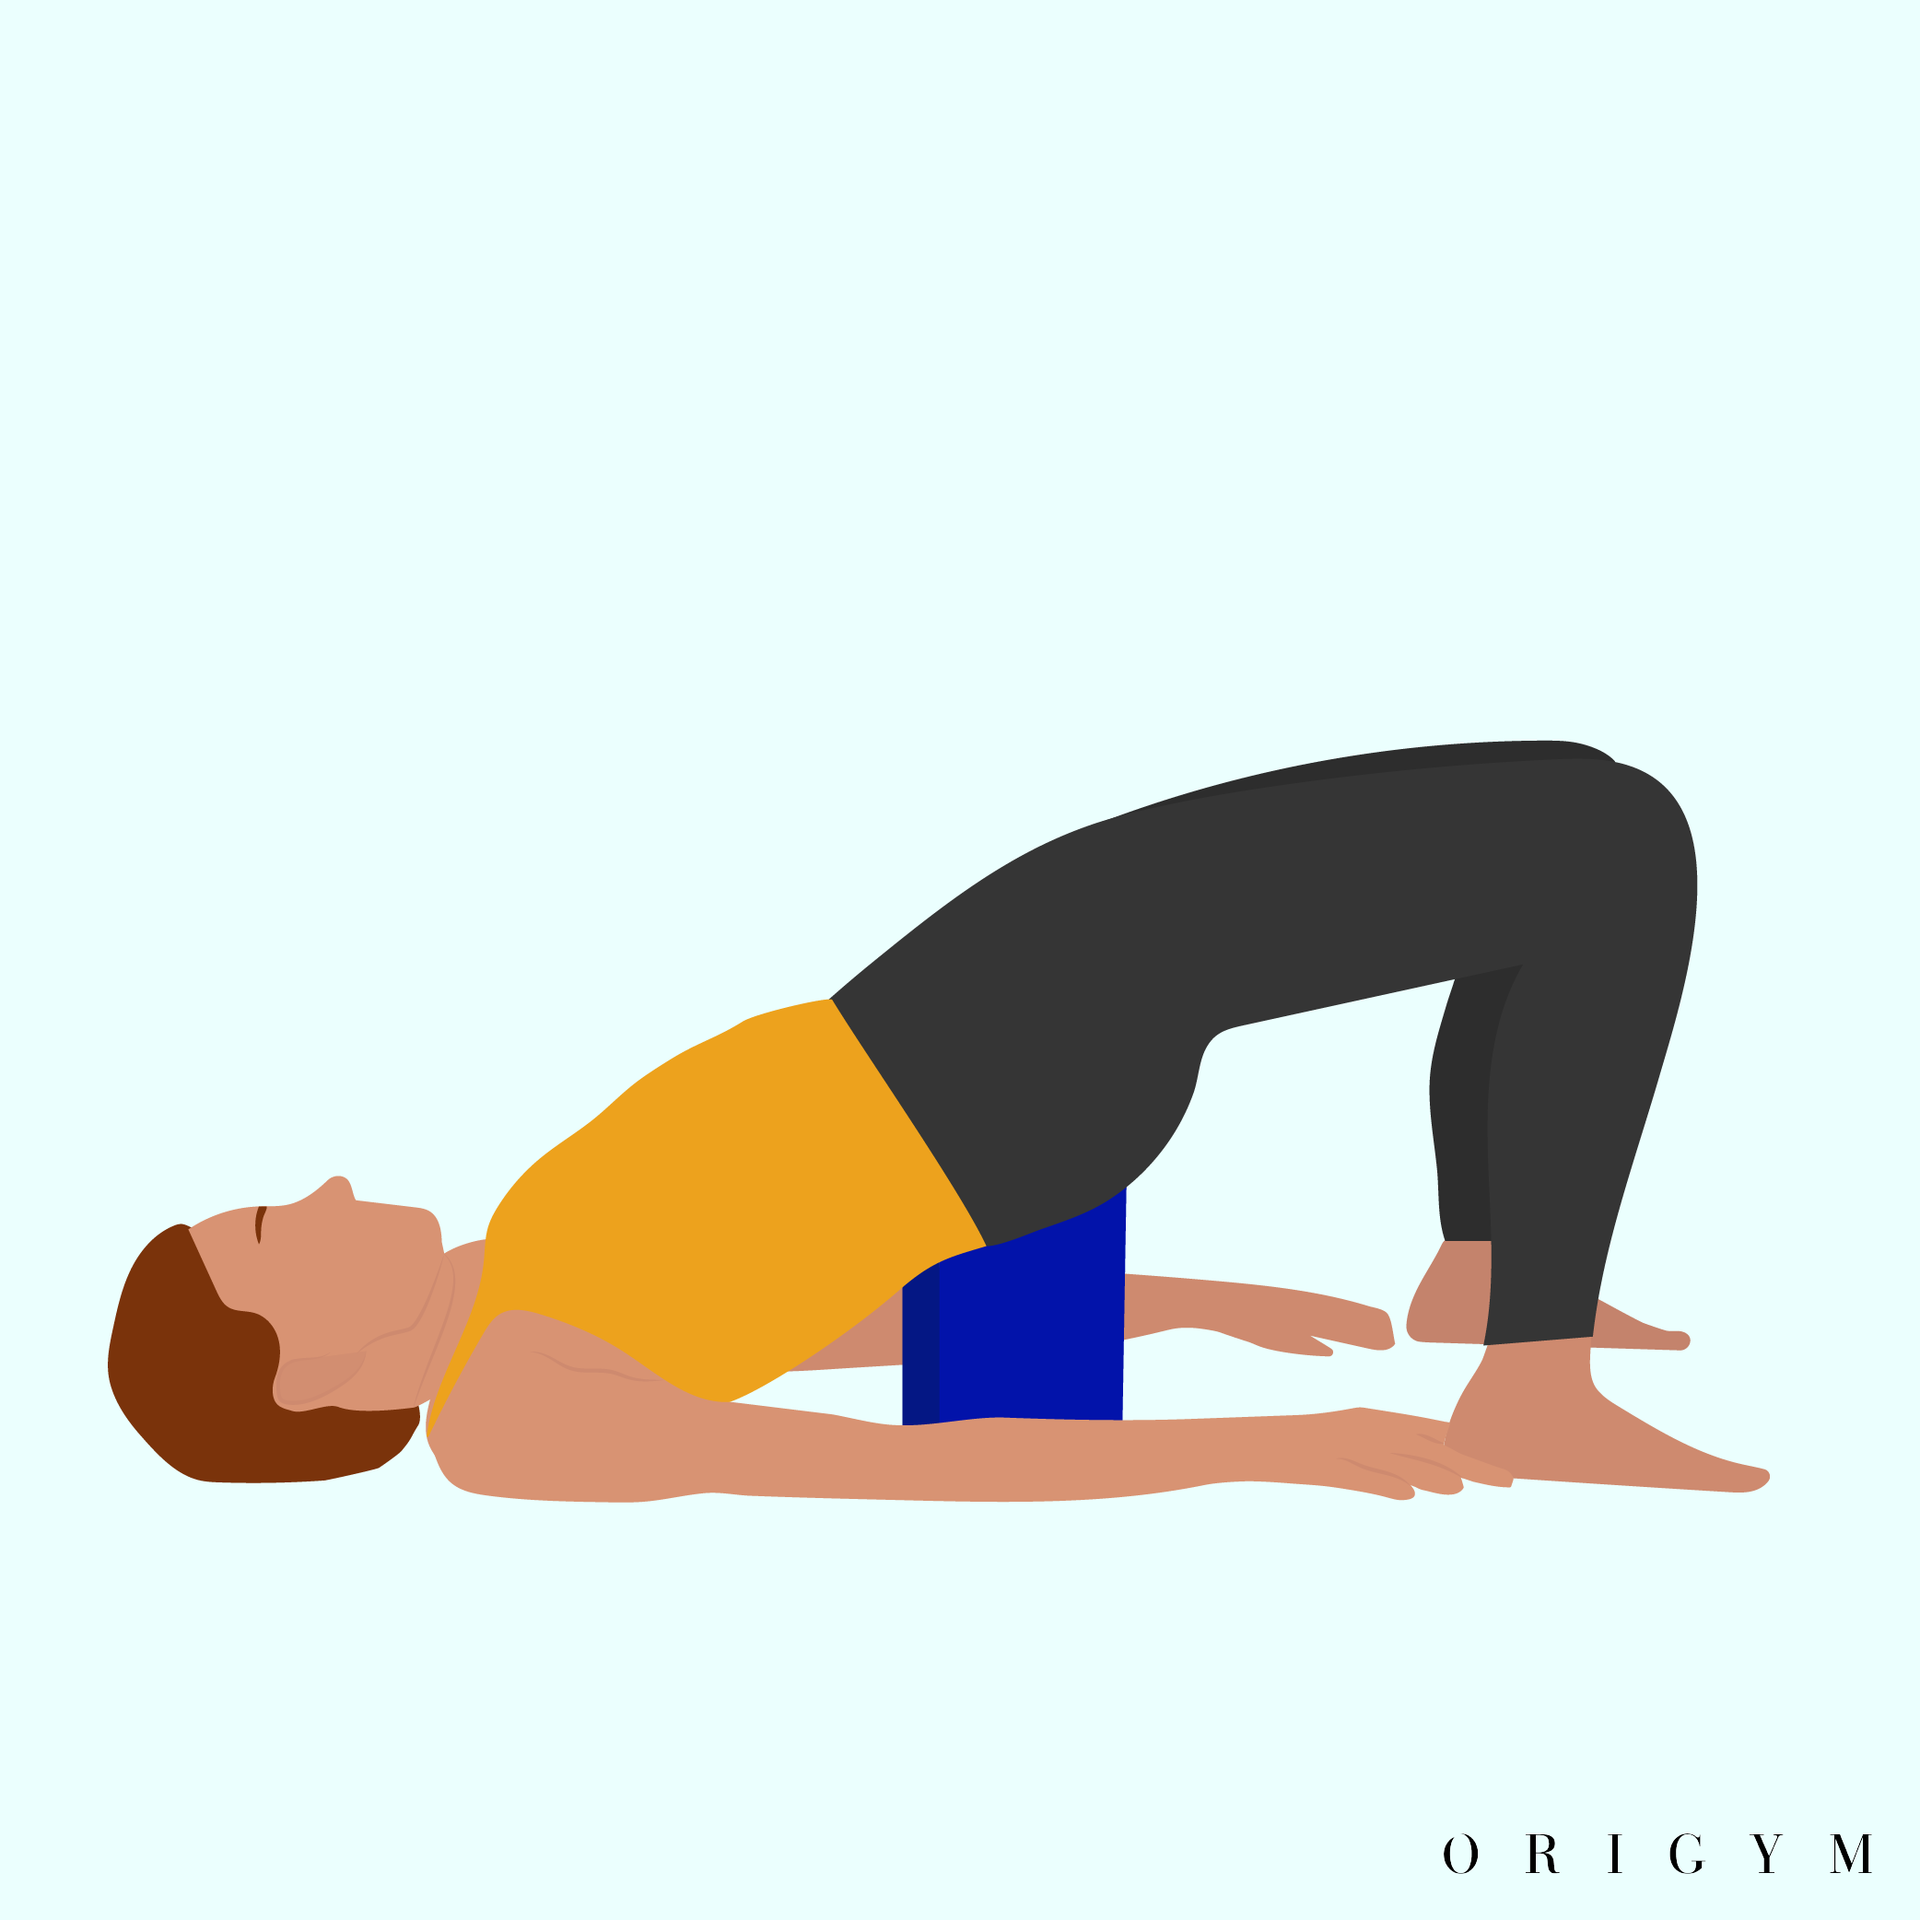 No Props, No Problem! 7 Yin Yoga Poses to Do Anywhere - Yoga with Kassandra  Blog